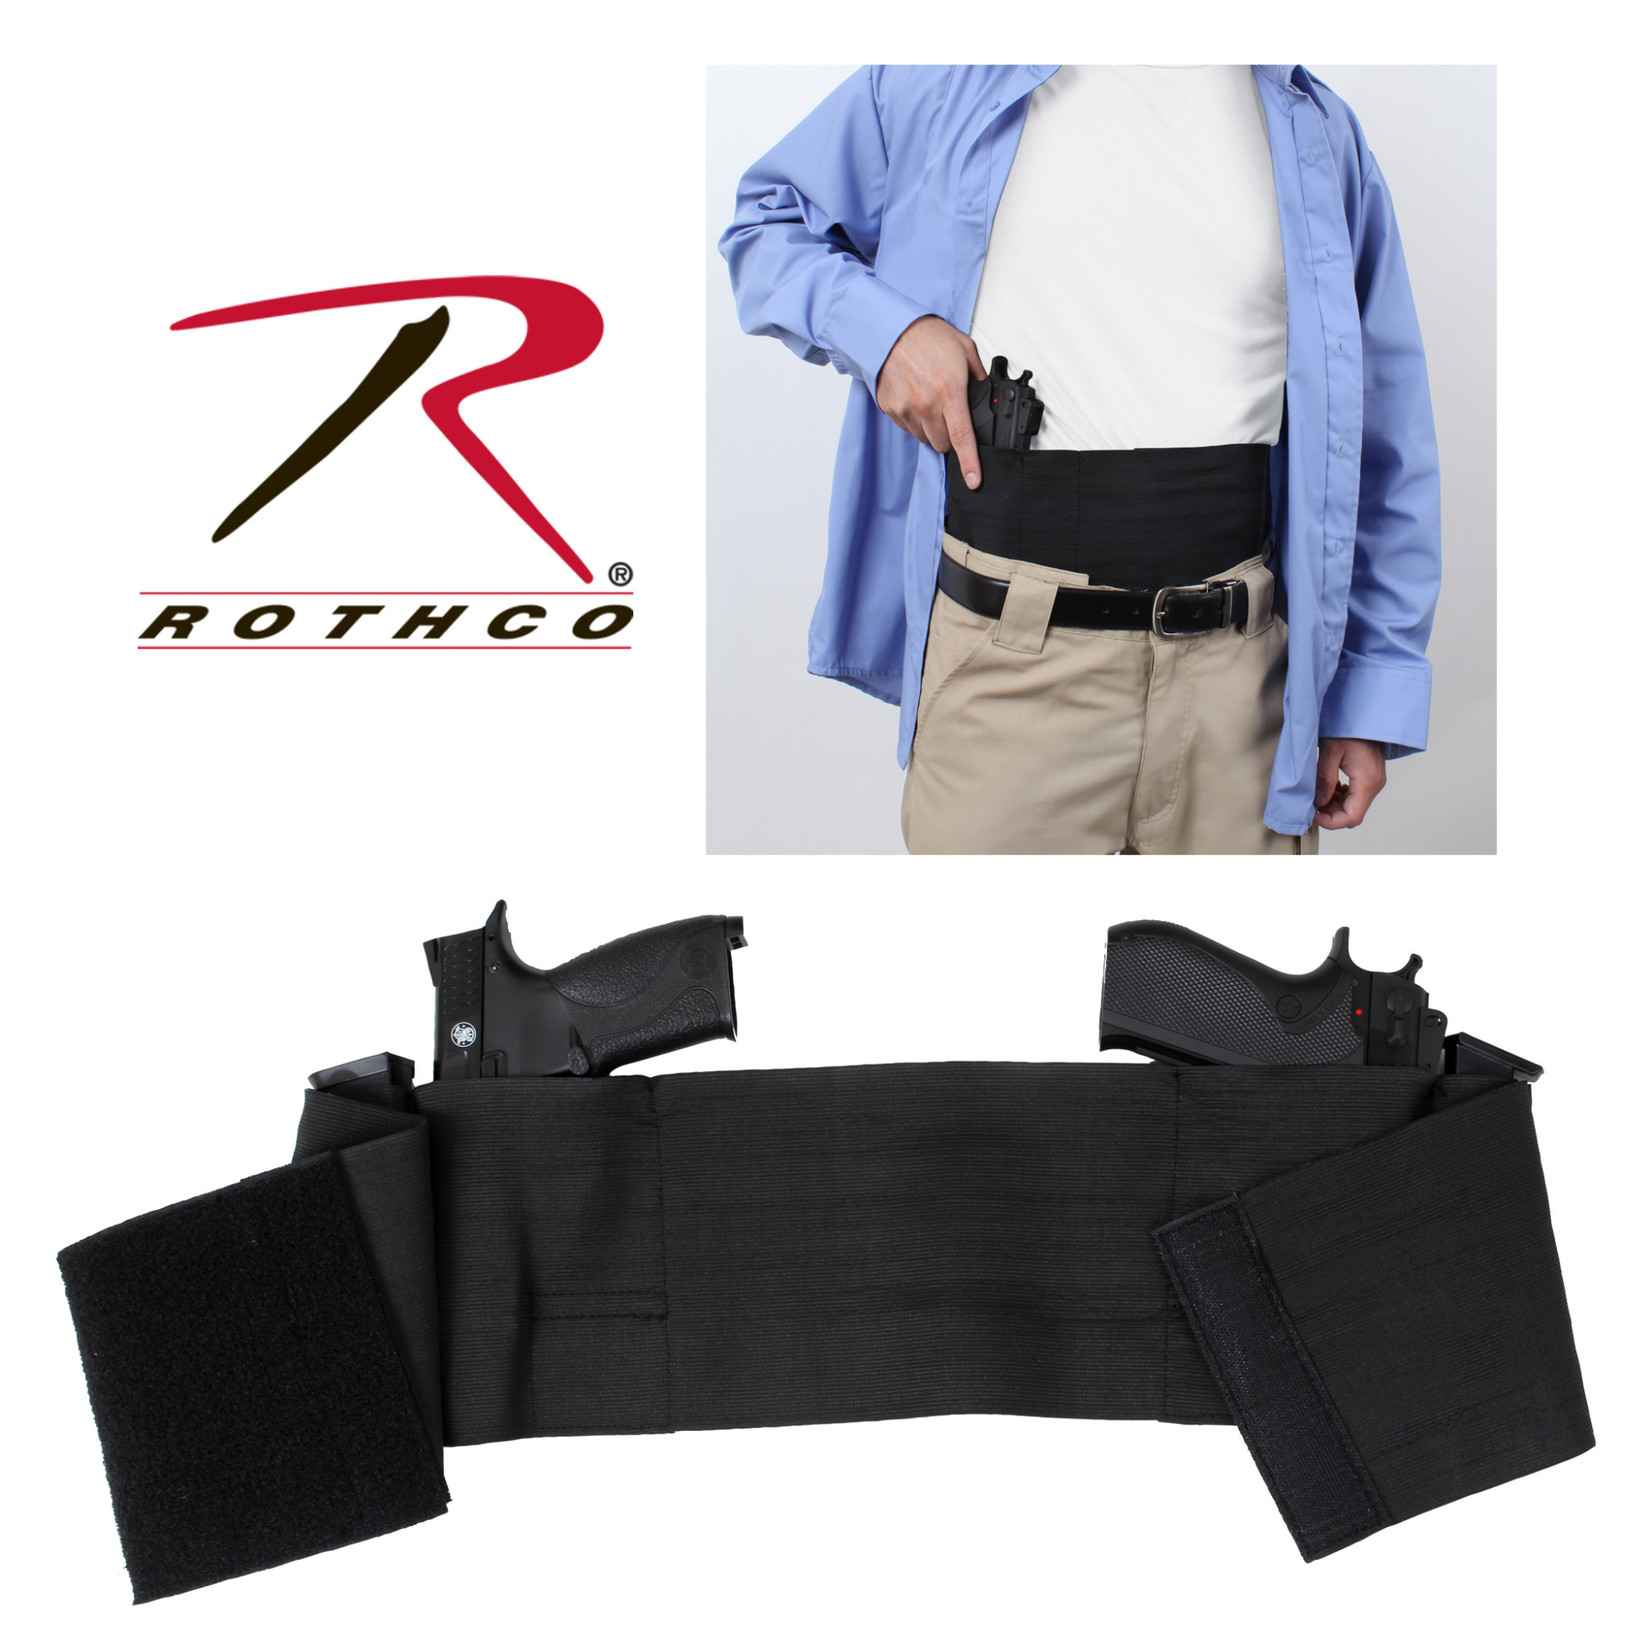 Rothco Rothco Concealed Elastic Belly Holster